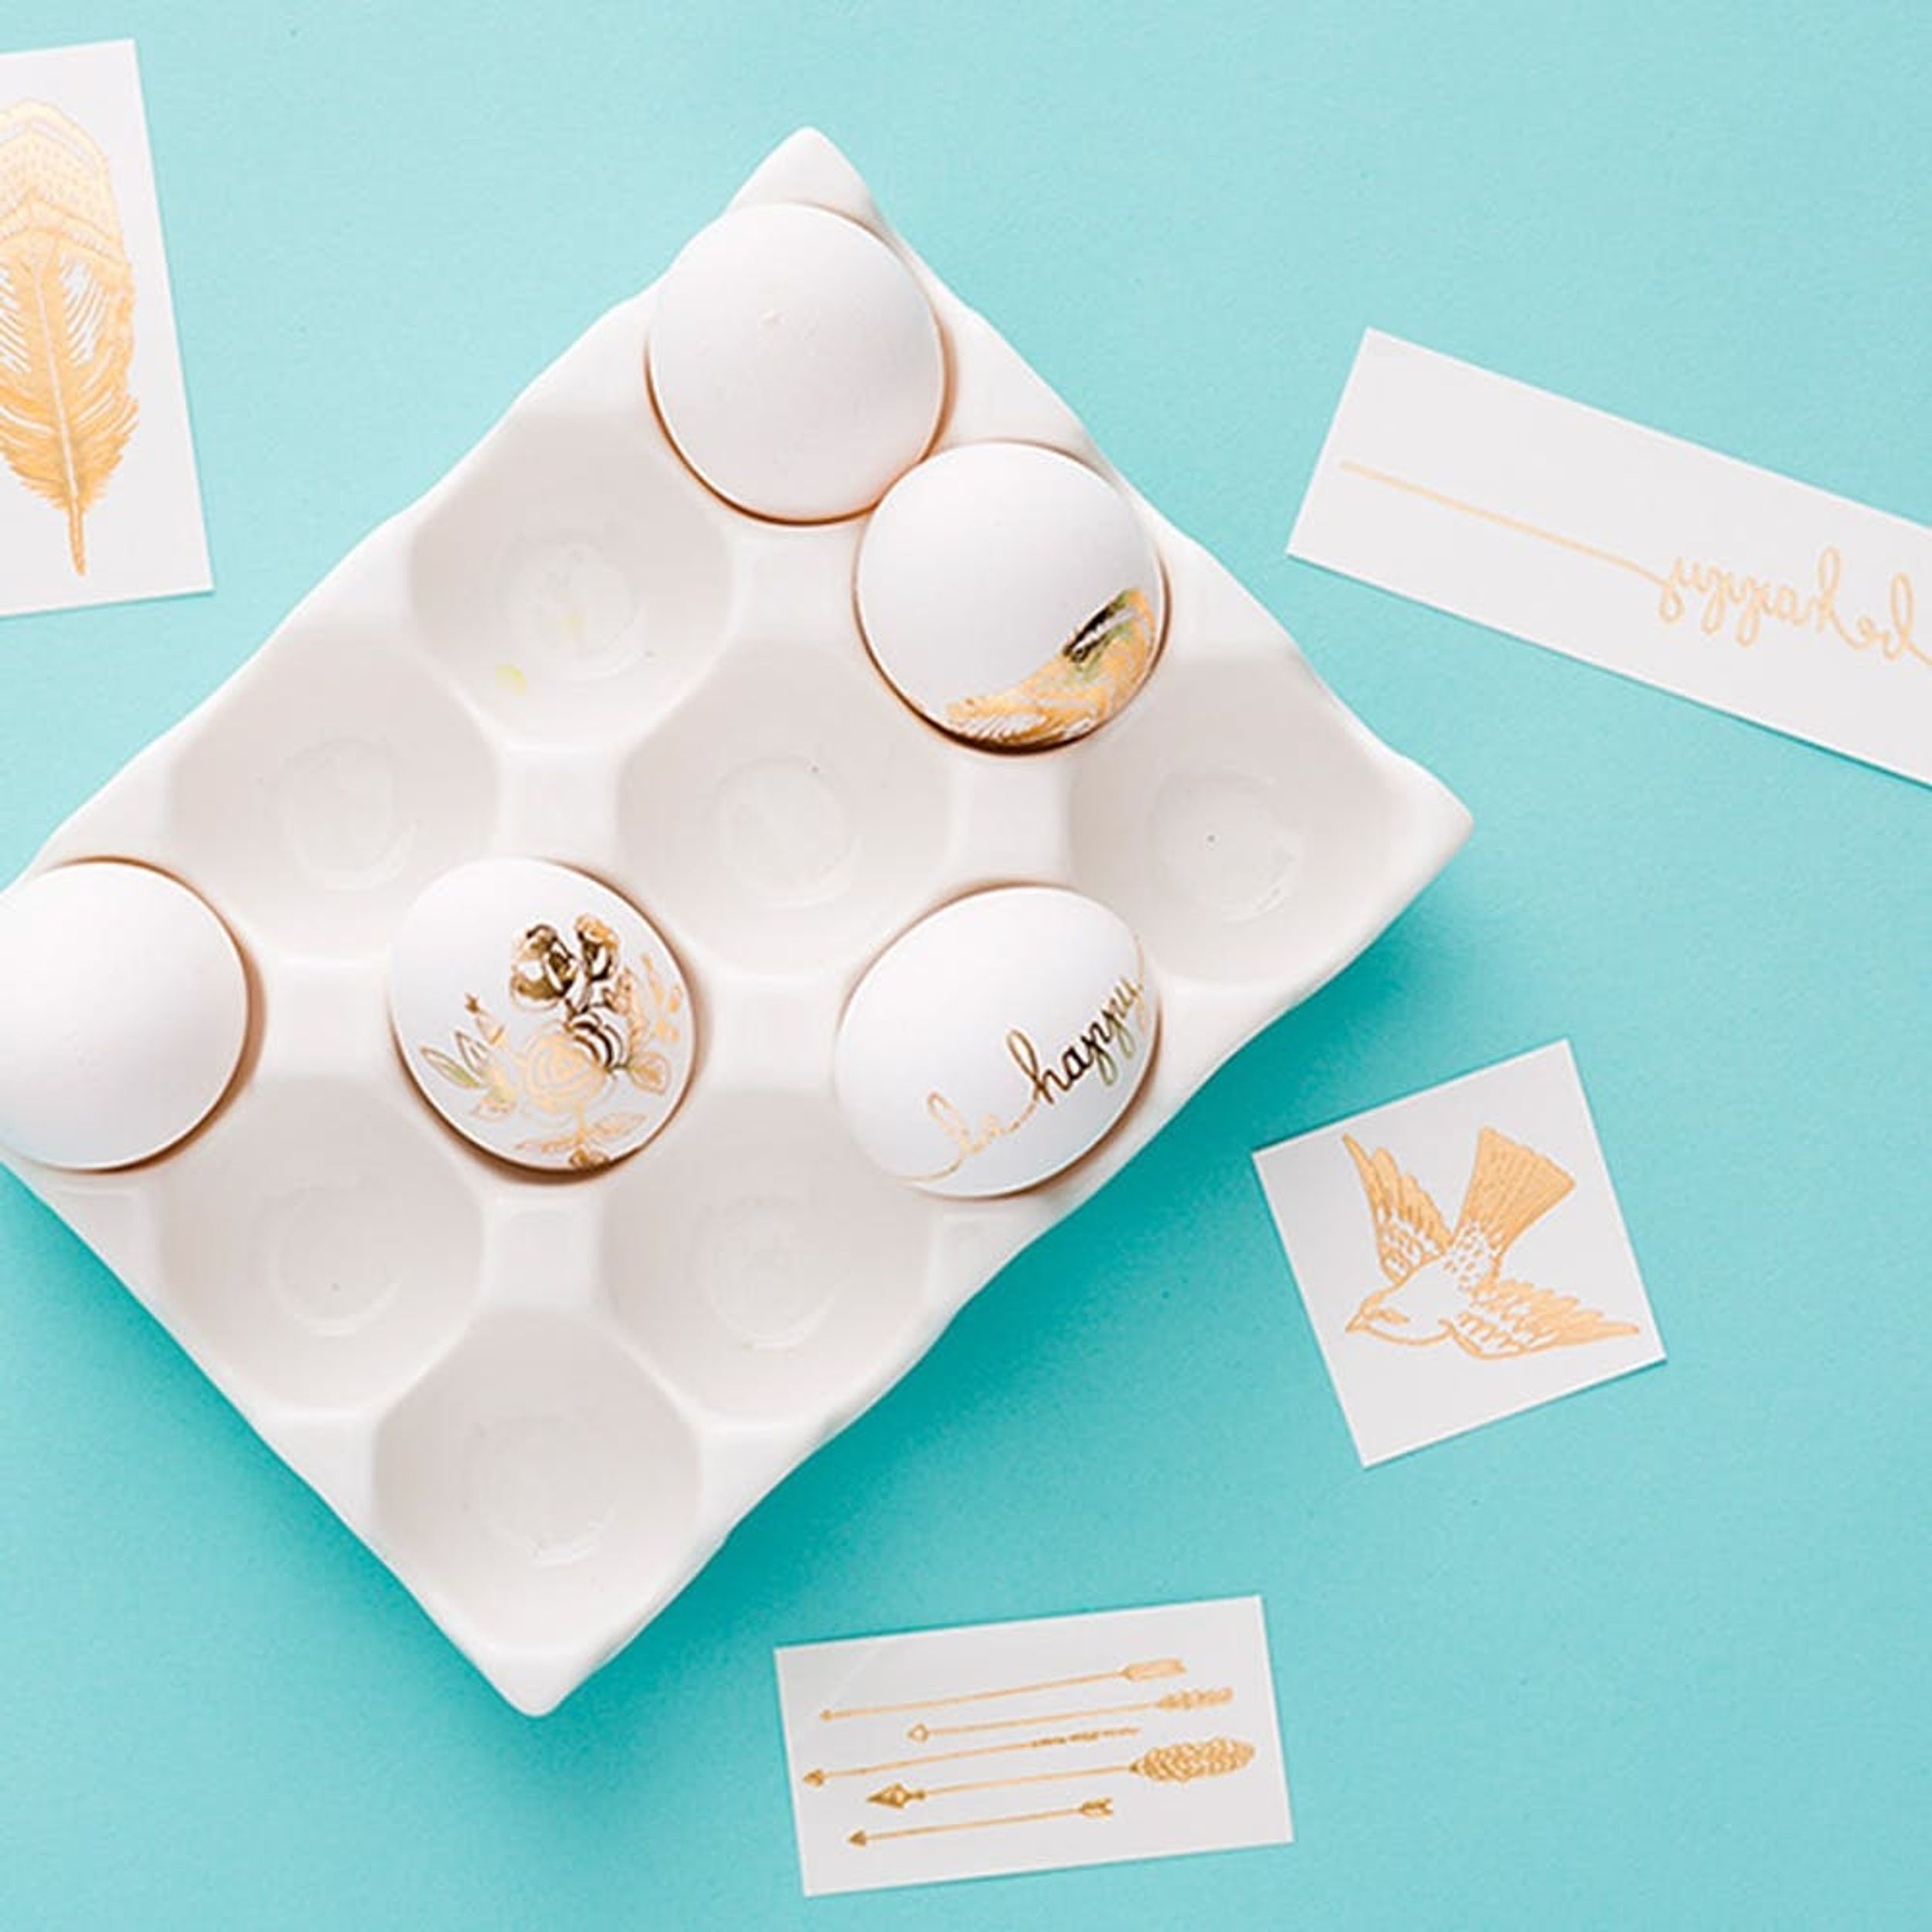 Temporary Tattoos + Easter Eggs = The Easiest Egg Decorating Hack Ever